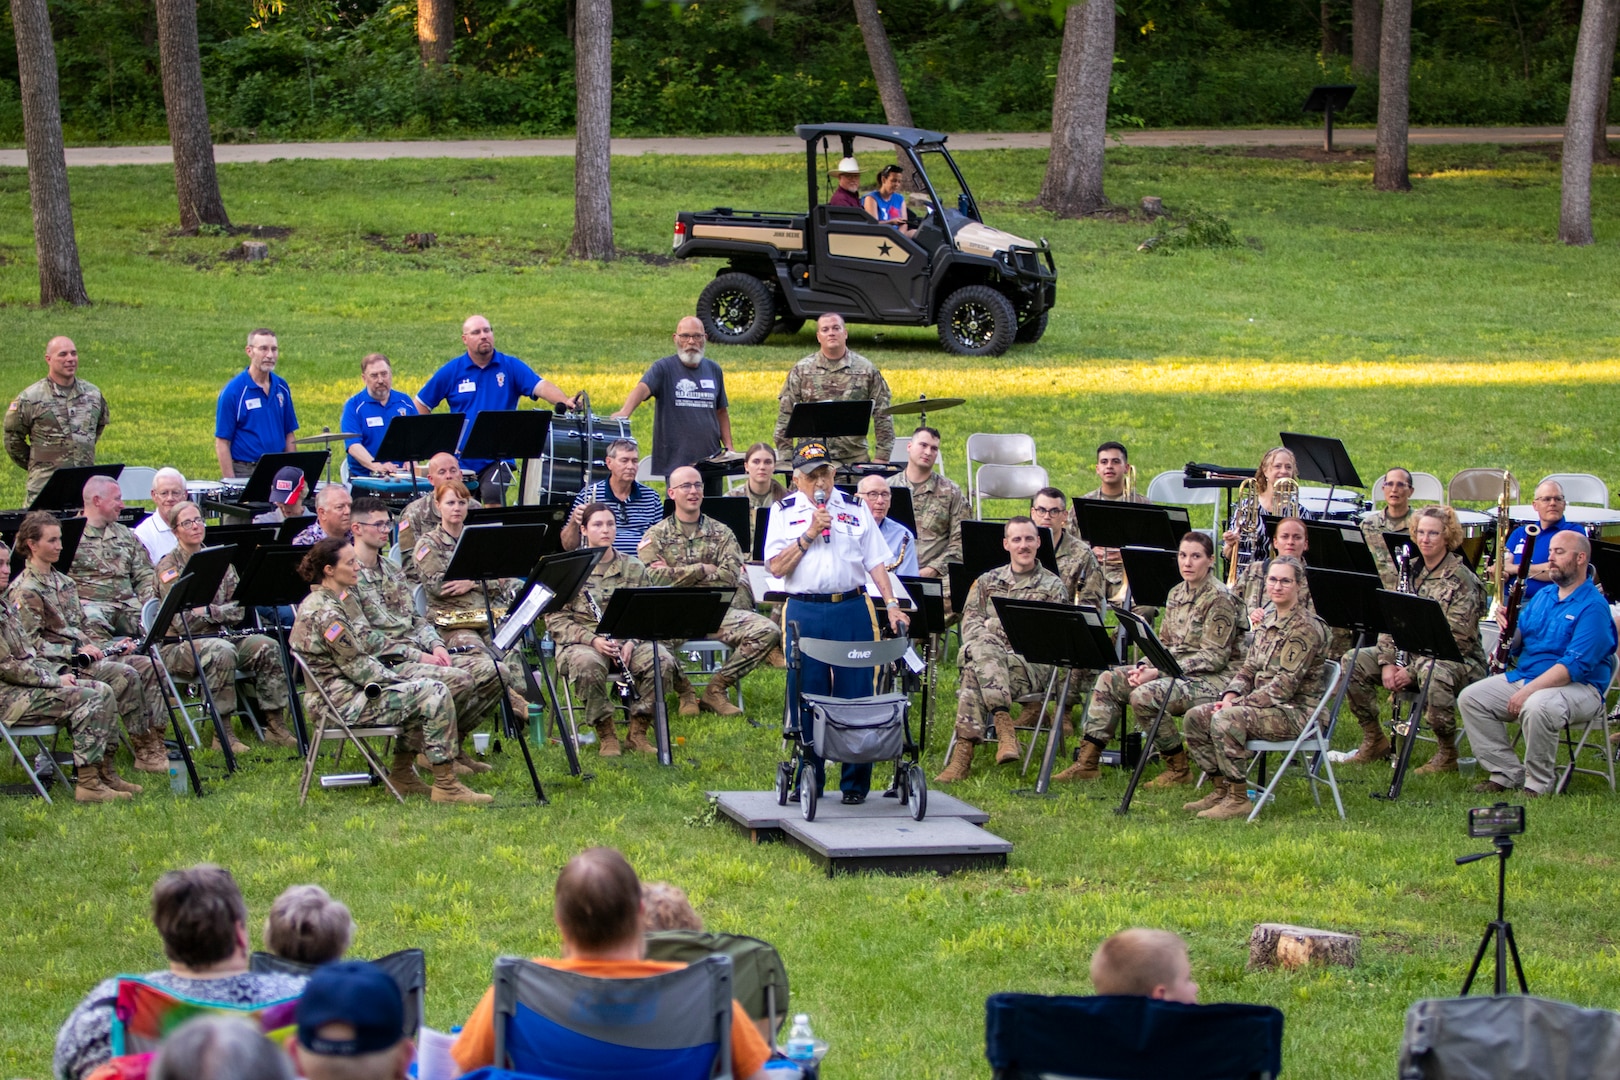 Retired Chief Warrant Officer 4 William Splichal, 99-years-old, conducts the Nebraska National Guard's 43rd Army Band Soldiers and alumni through John Philip Sousa's Golden Jubilee, during a 75th anniversary concert, June 3, 2023, at the Wildewood Park in Ralston, Nebraska.